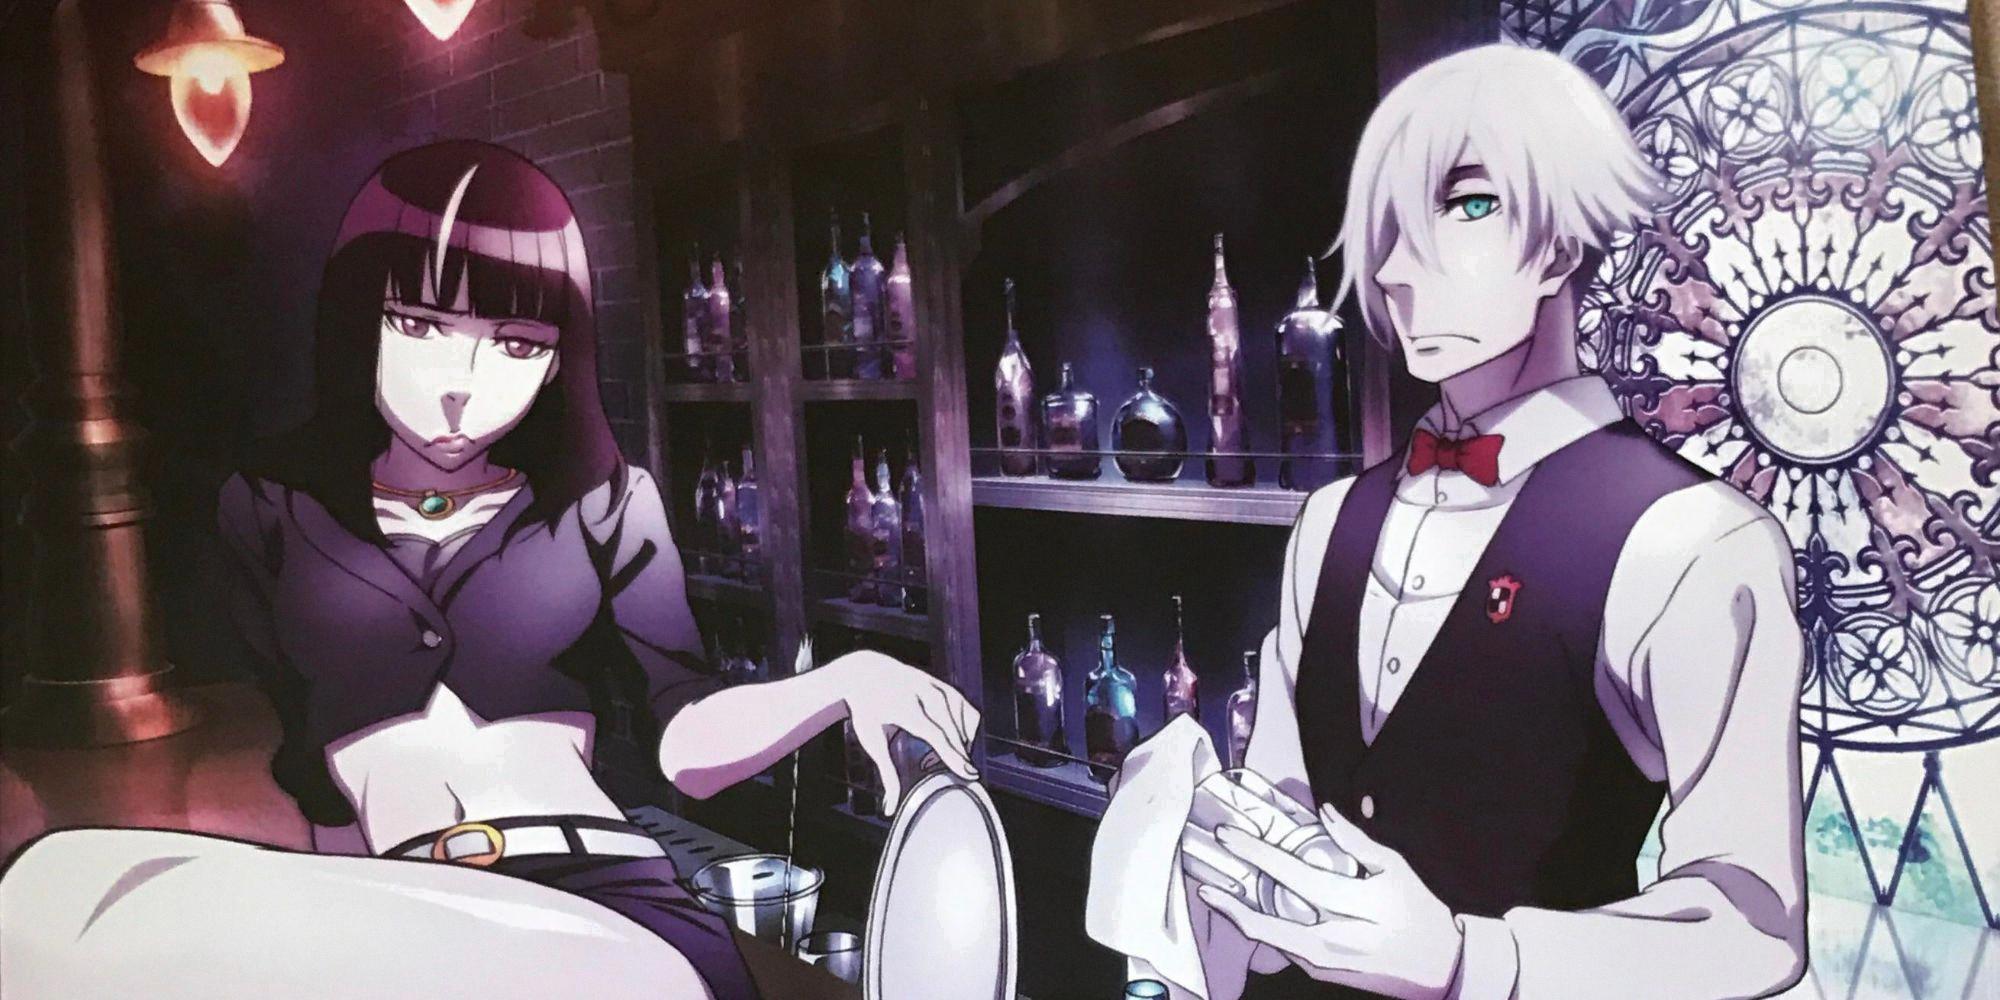 What We Know About Death Parade Season 2 .E.